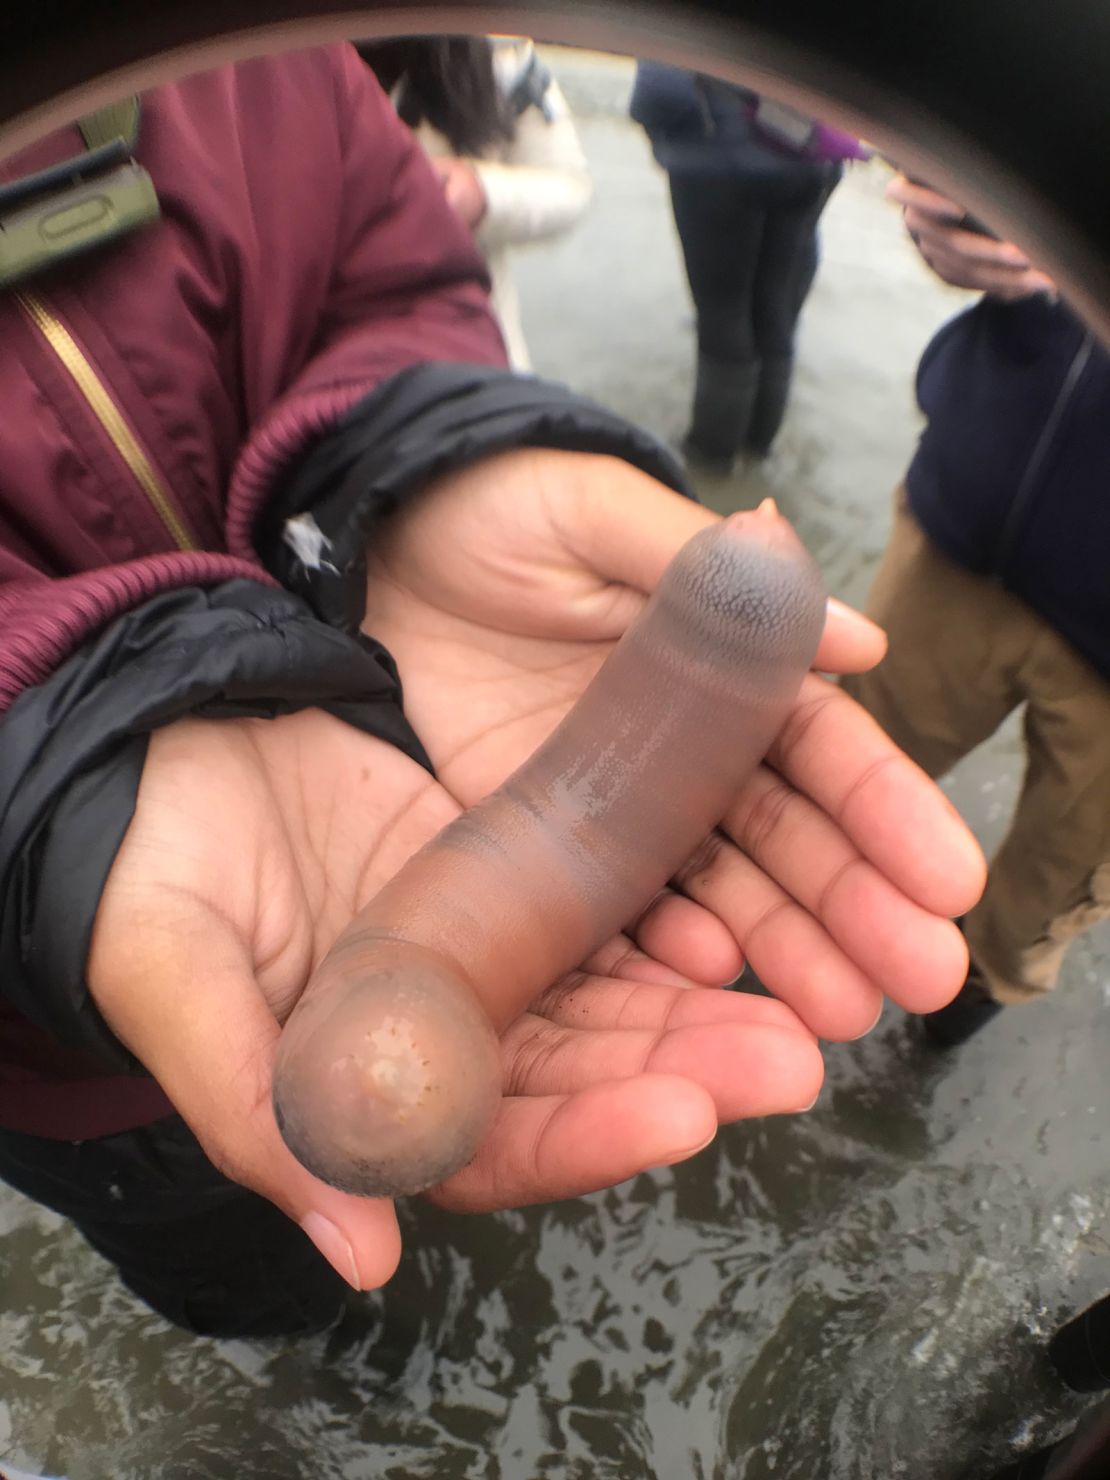 File photo of penis fish found on a beach in Bodega Bay, California